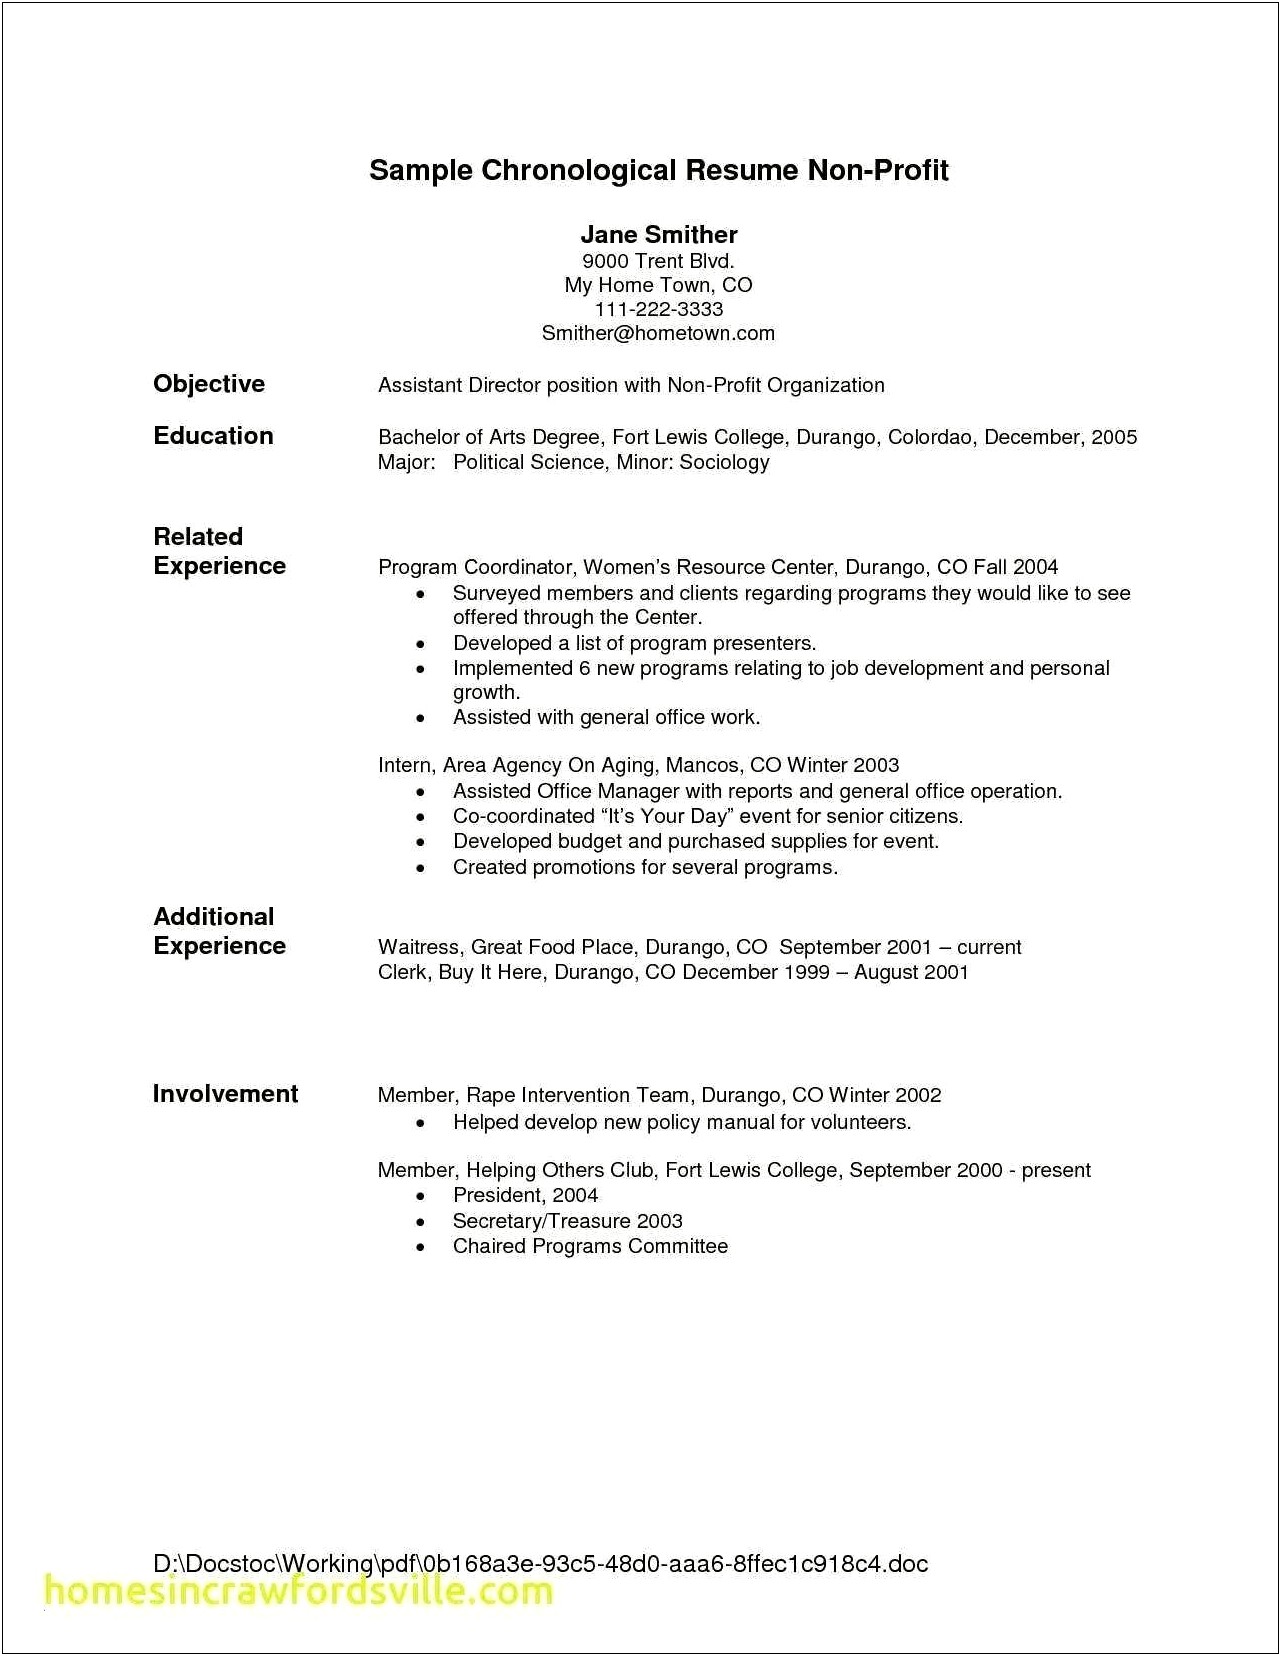 College Education Section Of Resume With Major Example